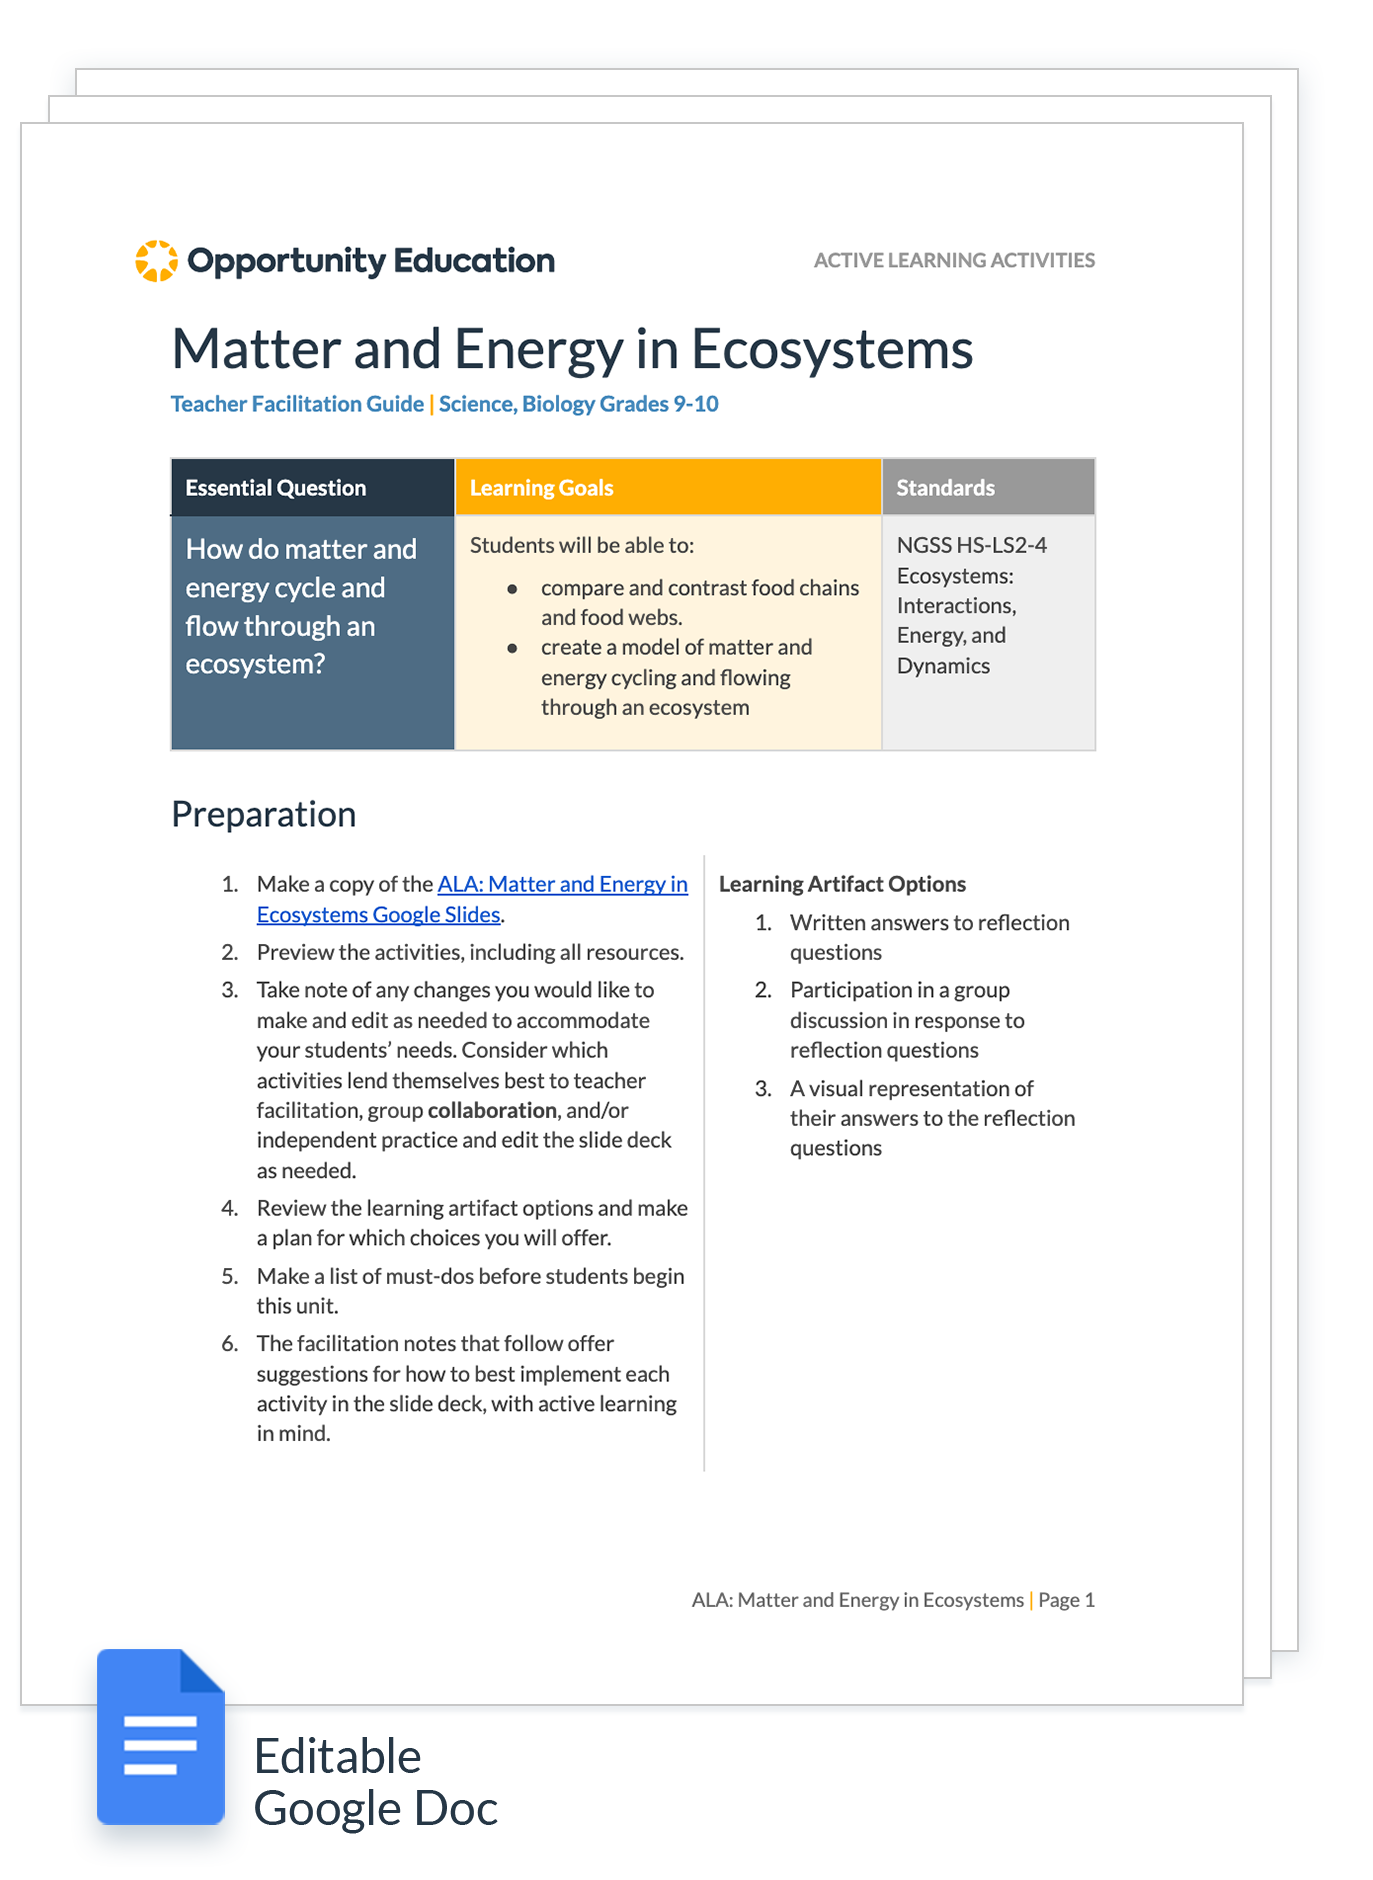 A preview of the teacher facilitation guide for "Matter and Energy in Ecosystems"